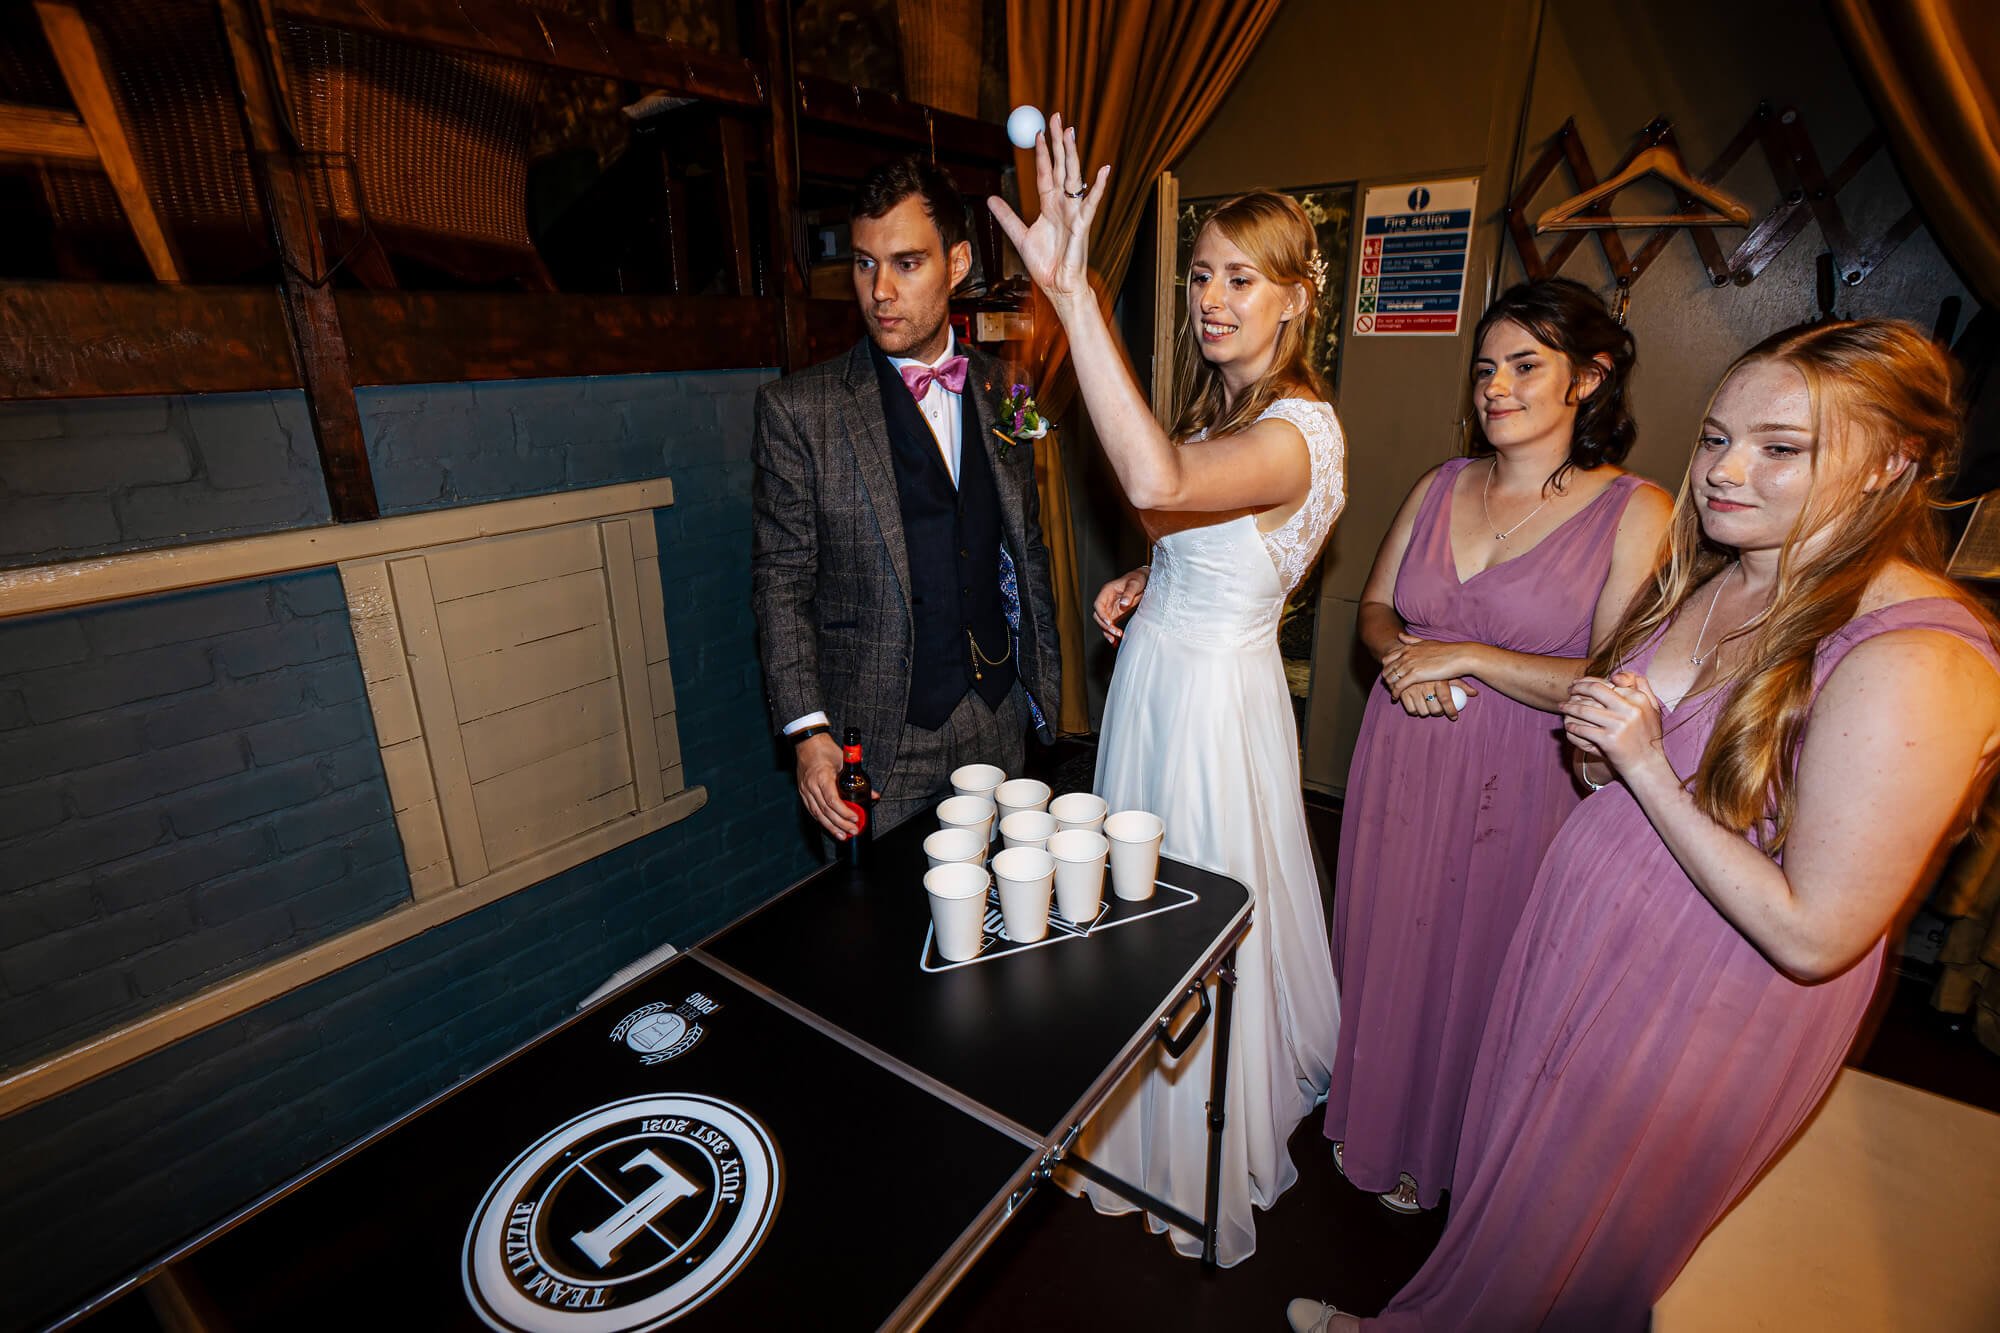 Bride playing beer pong in the evening